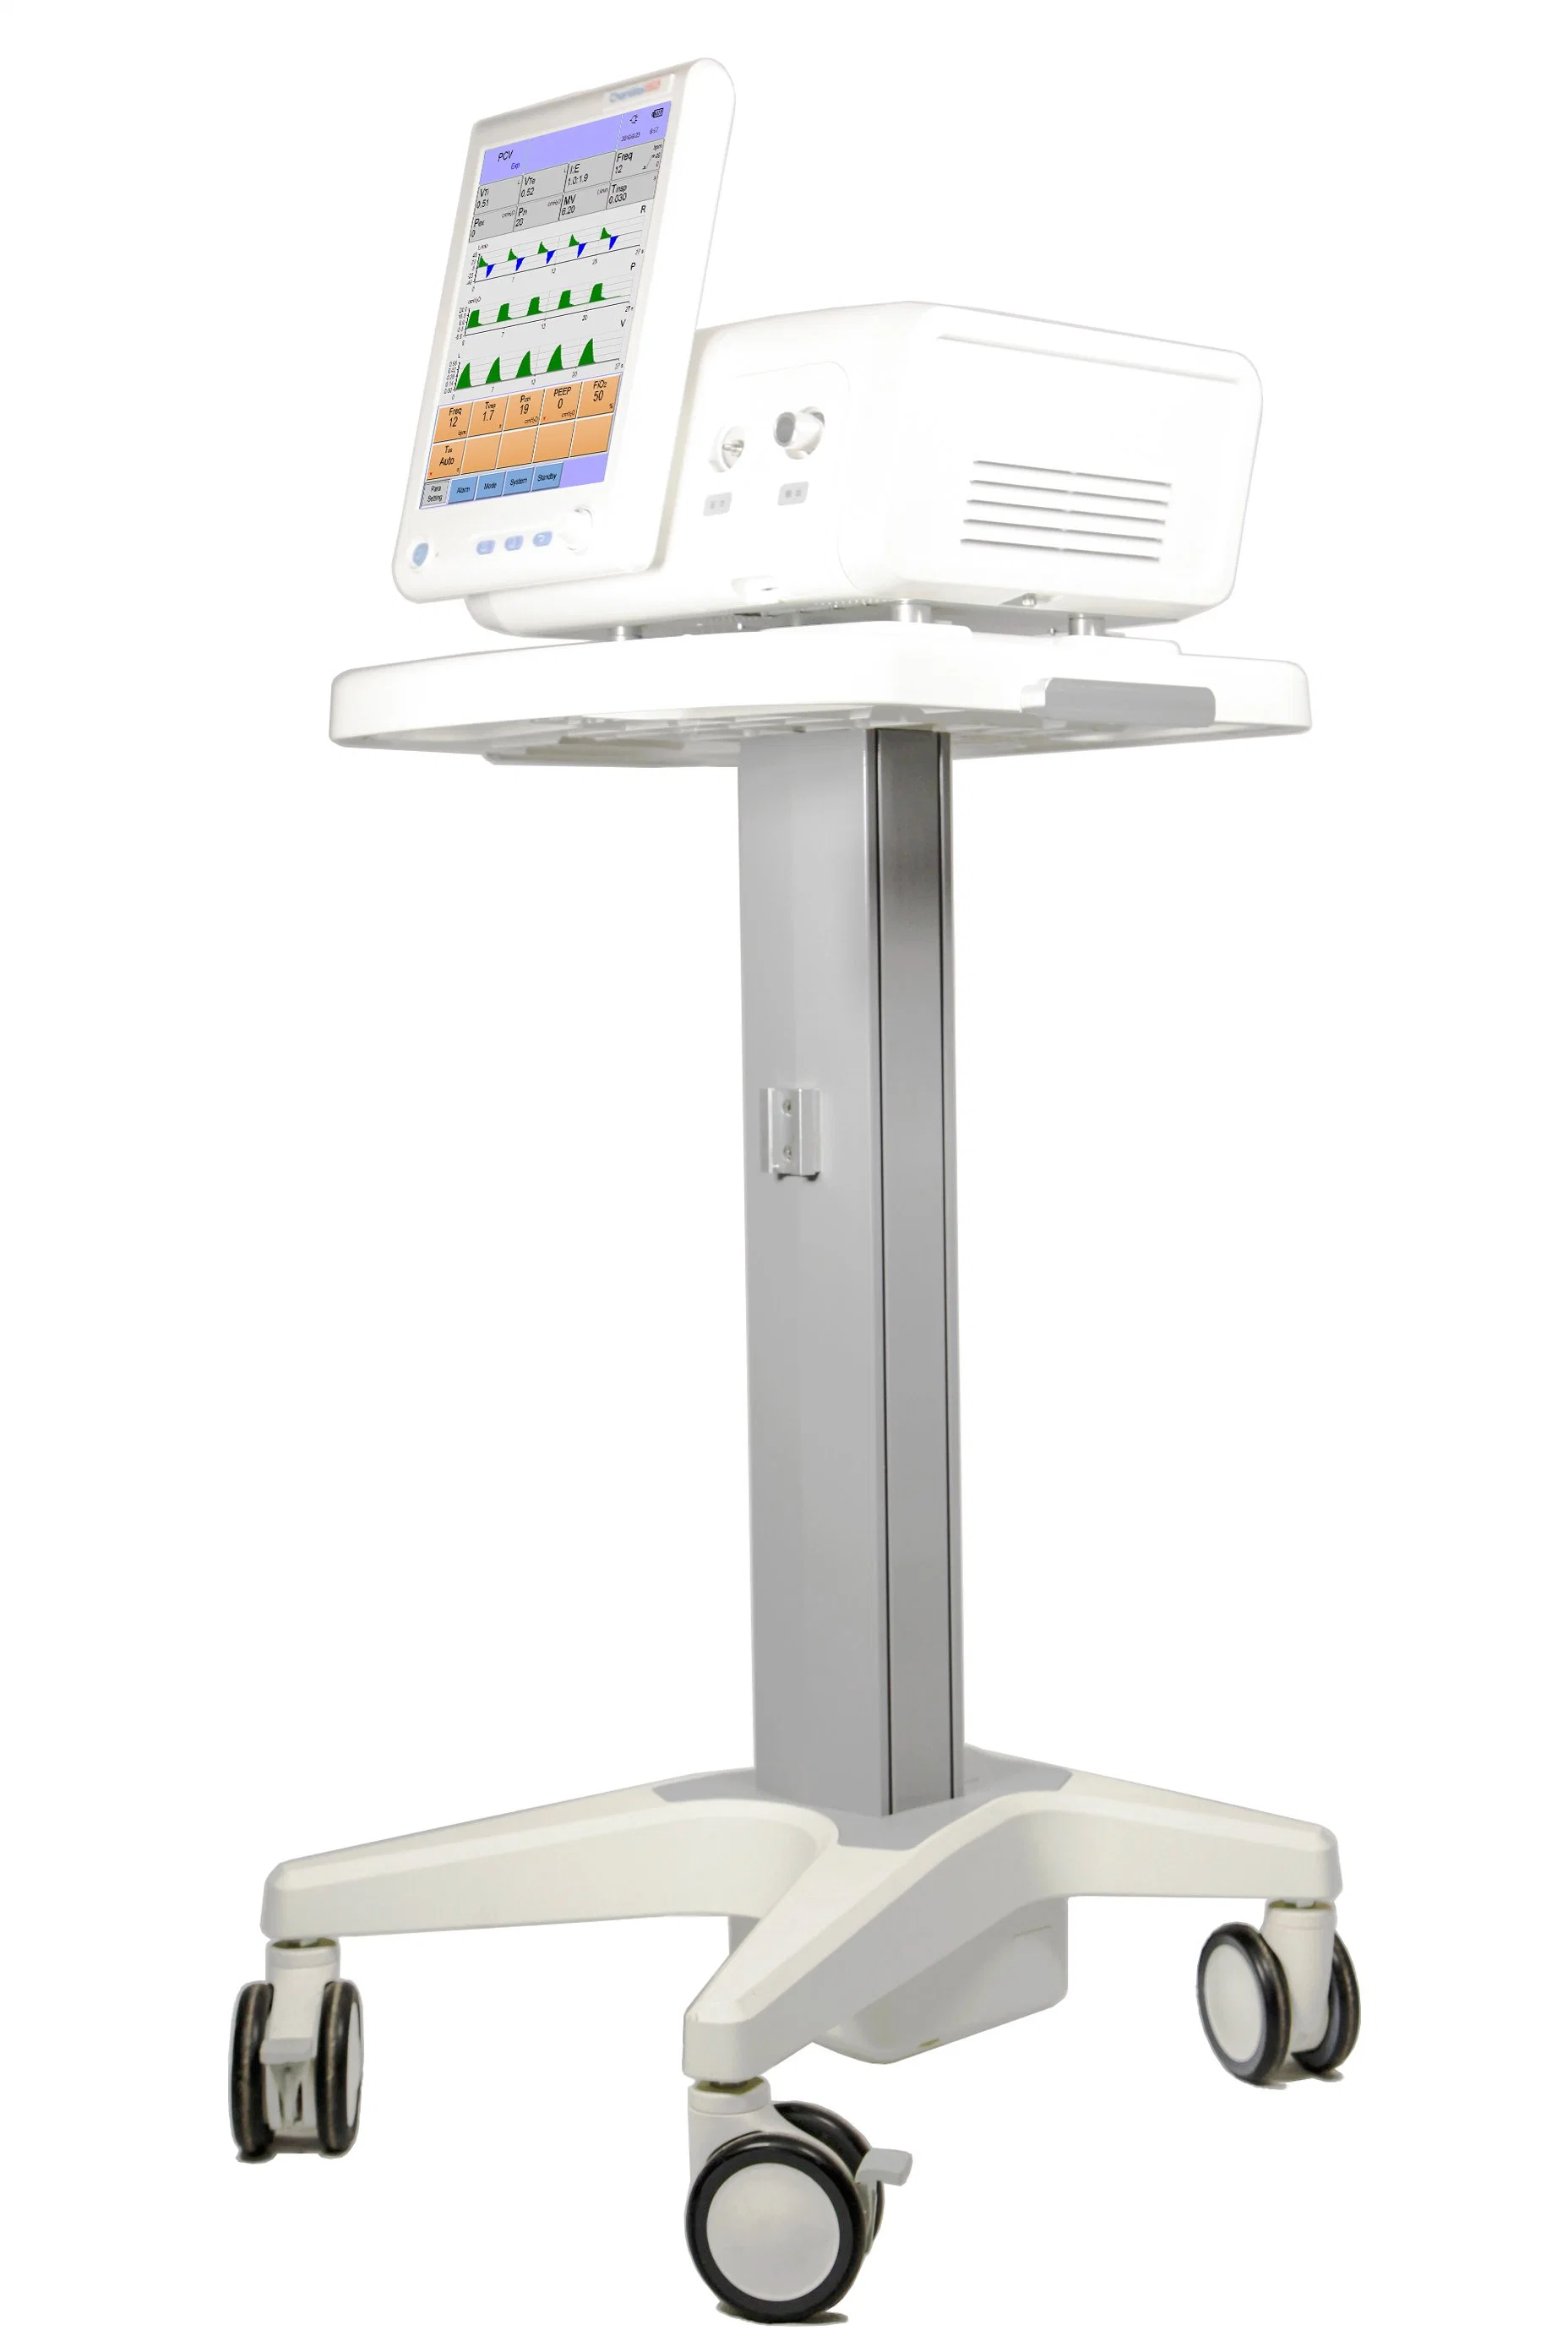 Medical Fan Adult and Infant ICU Turbine Ventilator Chenwei (CWH-8010) with High Flow Therapy